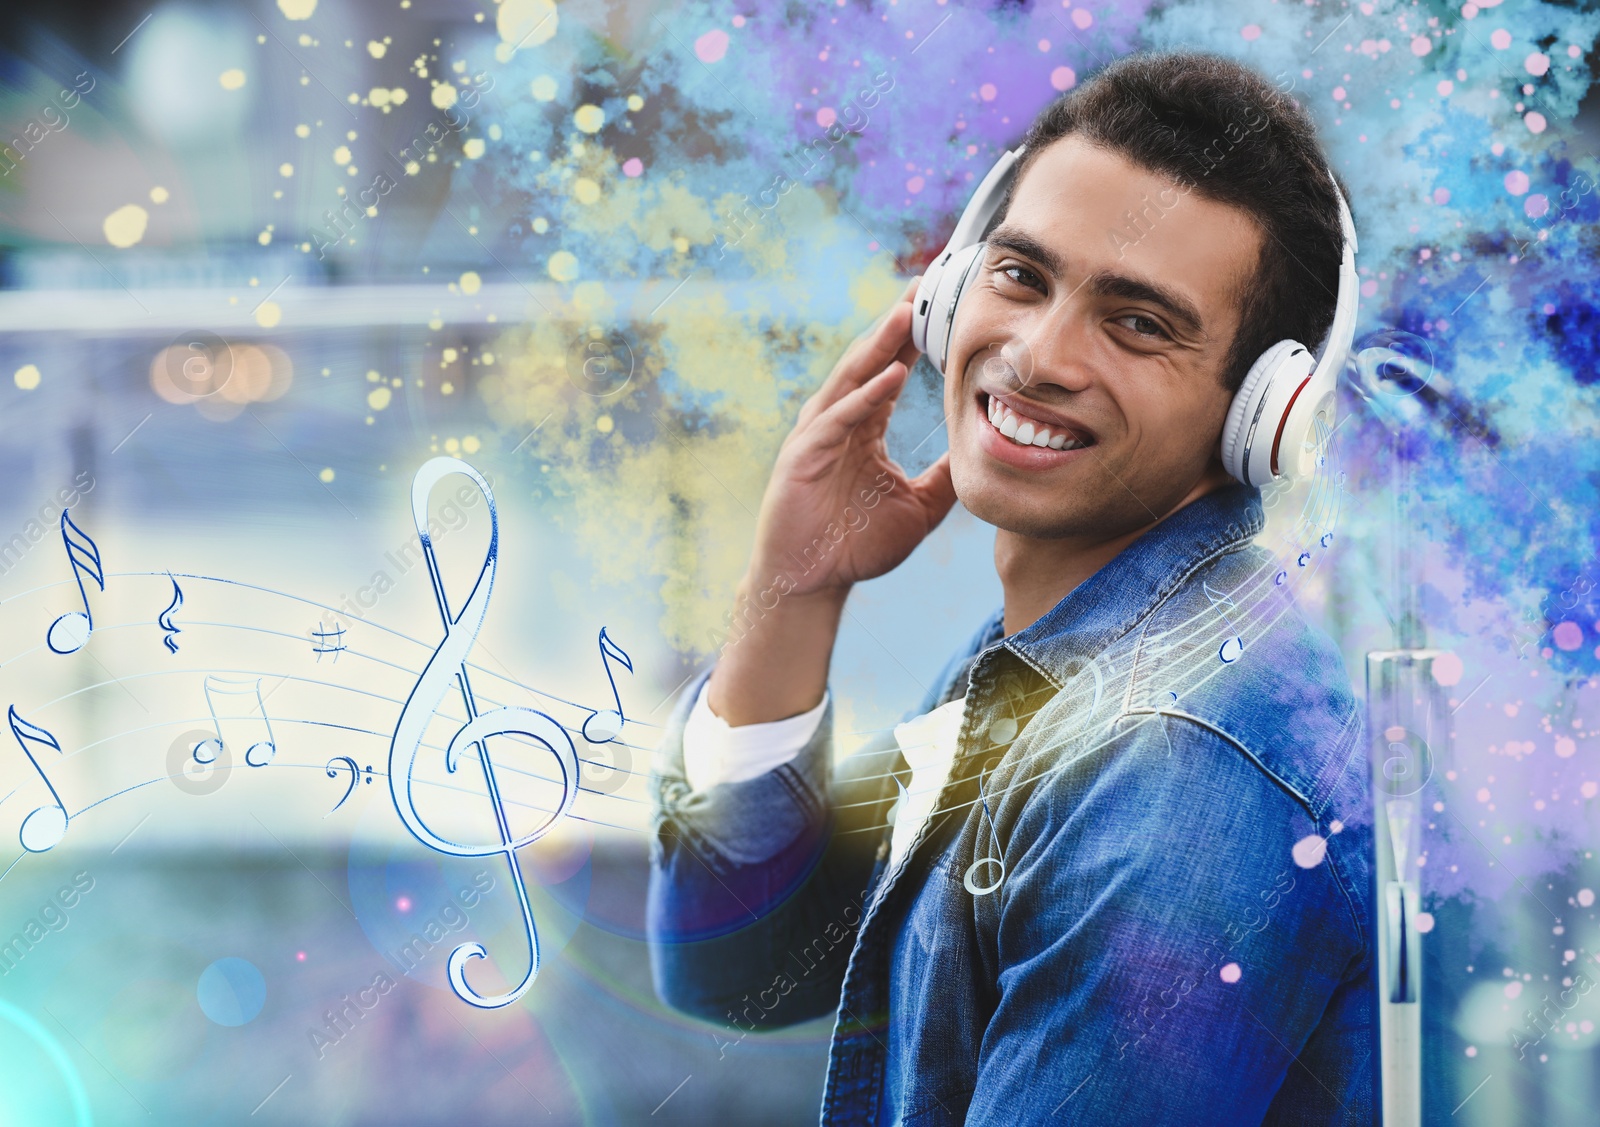 Image of Young African-American man listening to music with headphones outdoors. Bright notes illustration